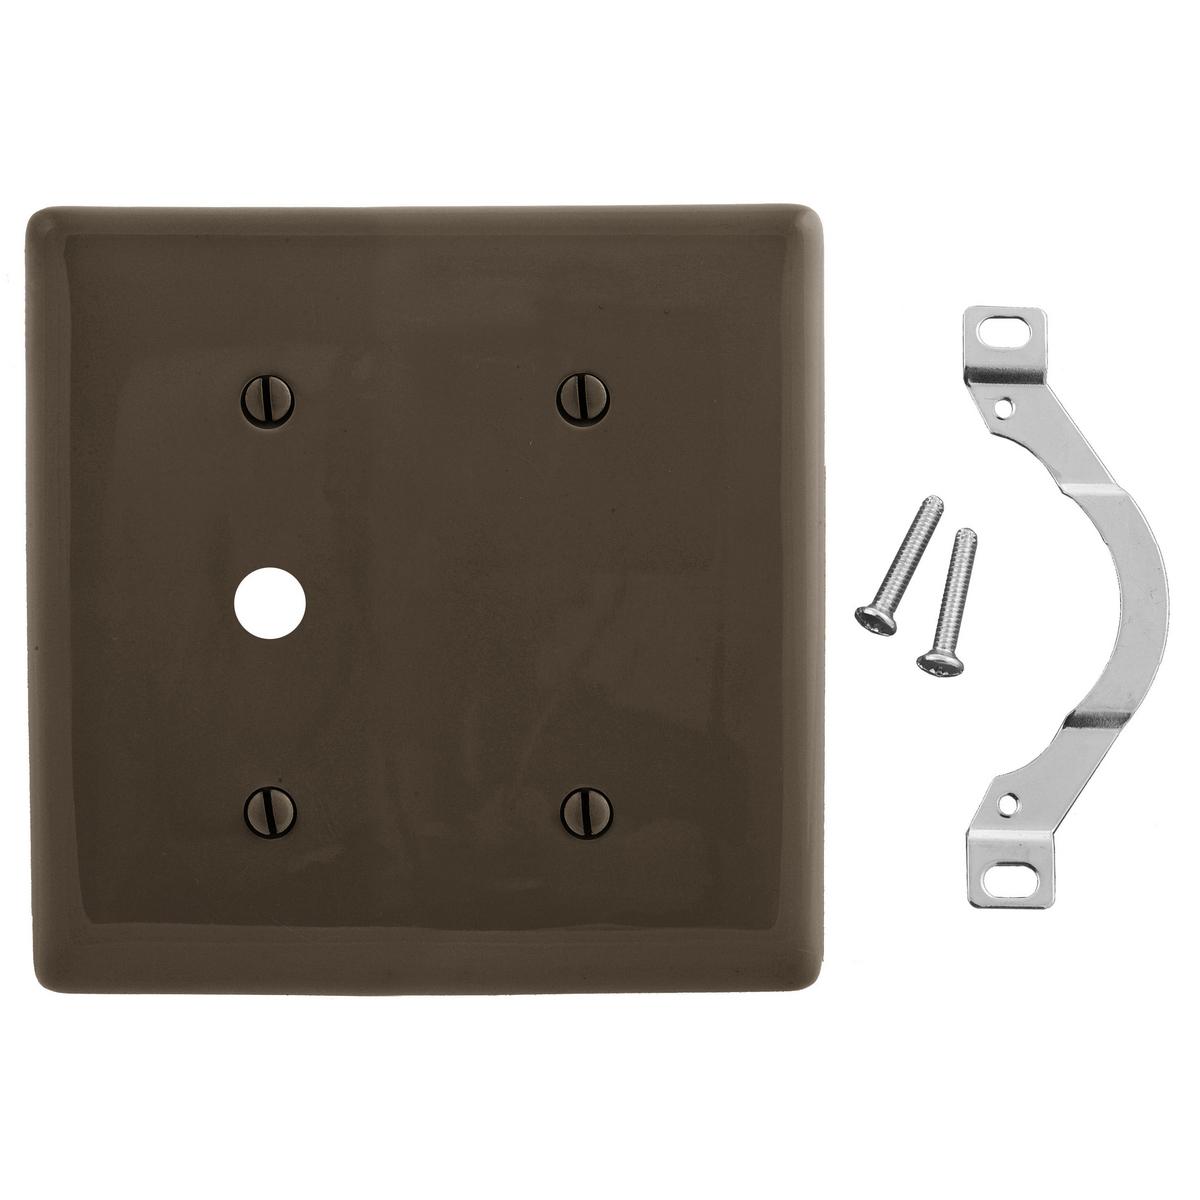 Hubbell NP1214 Wallplates, Nylon, 2-Gang, 1) Blank, 1) .406" Opening, Brown  ; Reinforcement ribs for extra strength ; High-impact, self-extinguishing nylon material ; Captive screw feature holds mounting screw in place ; Standard Size is 1/8" larger to give you extra c